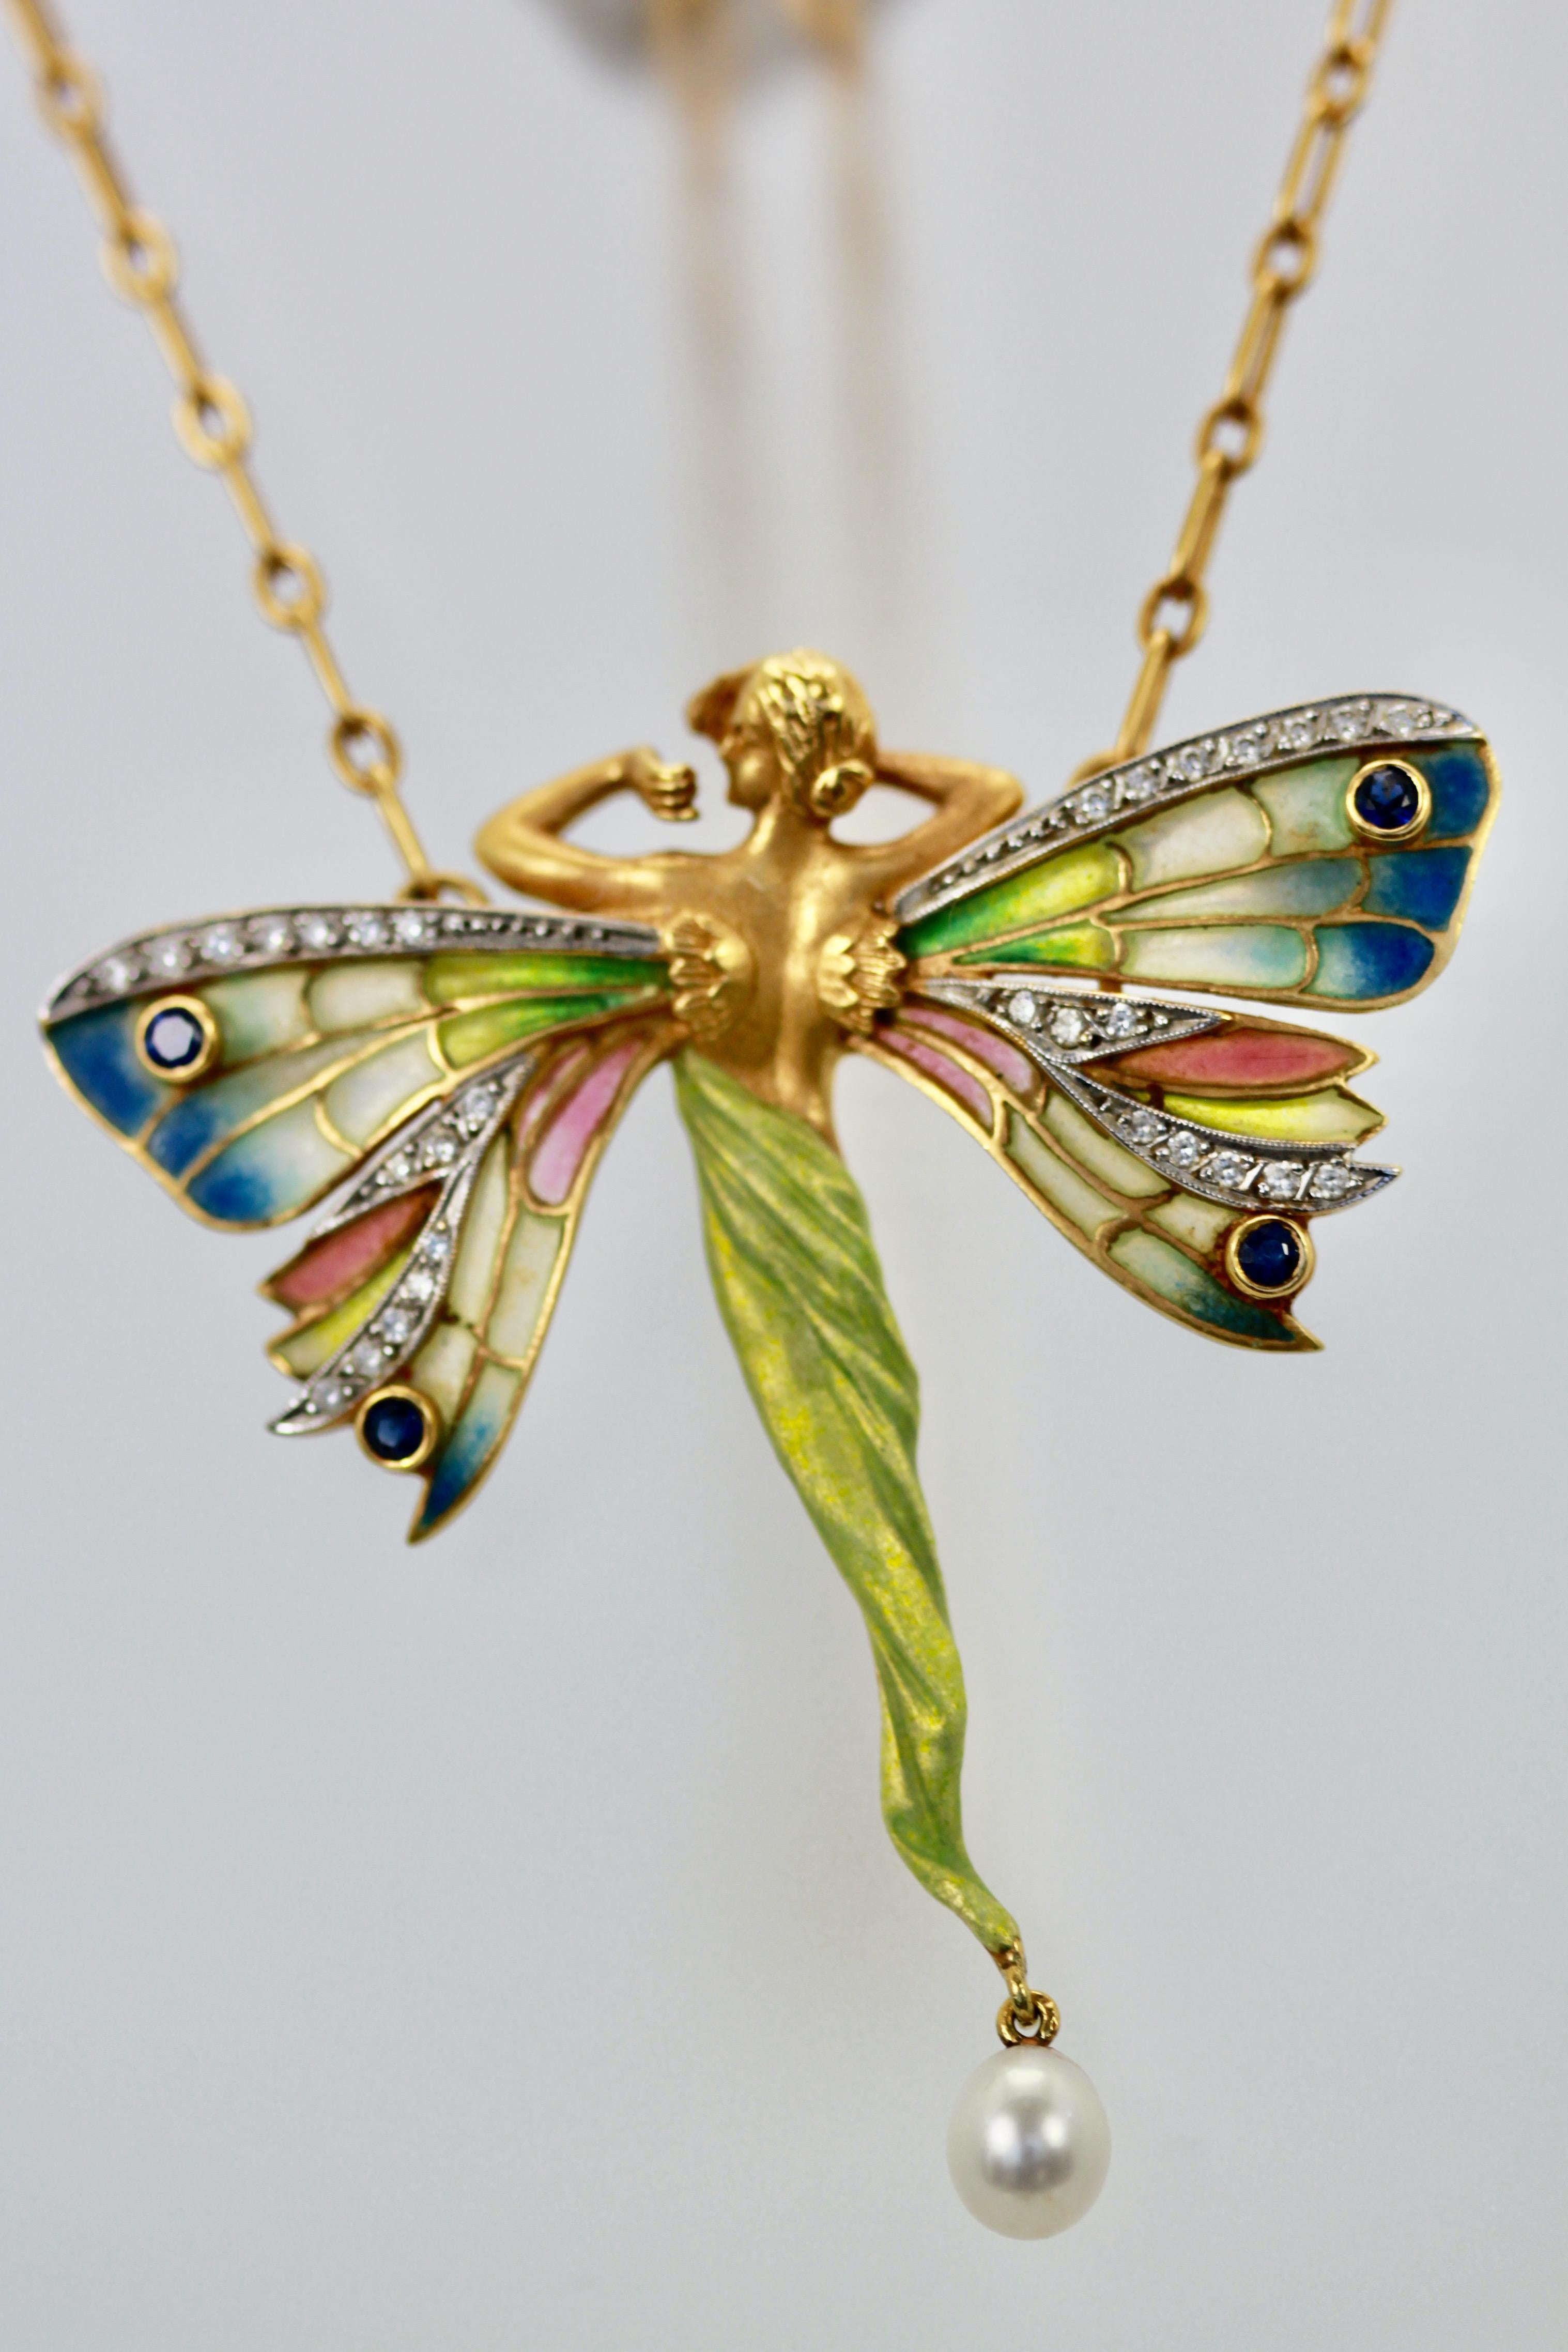 Masriera Plique a Jour Winged Lady Brooch and Pendant 4